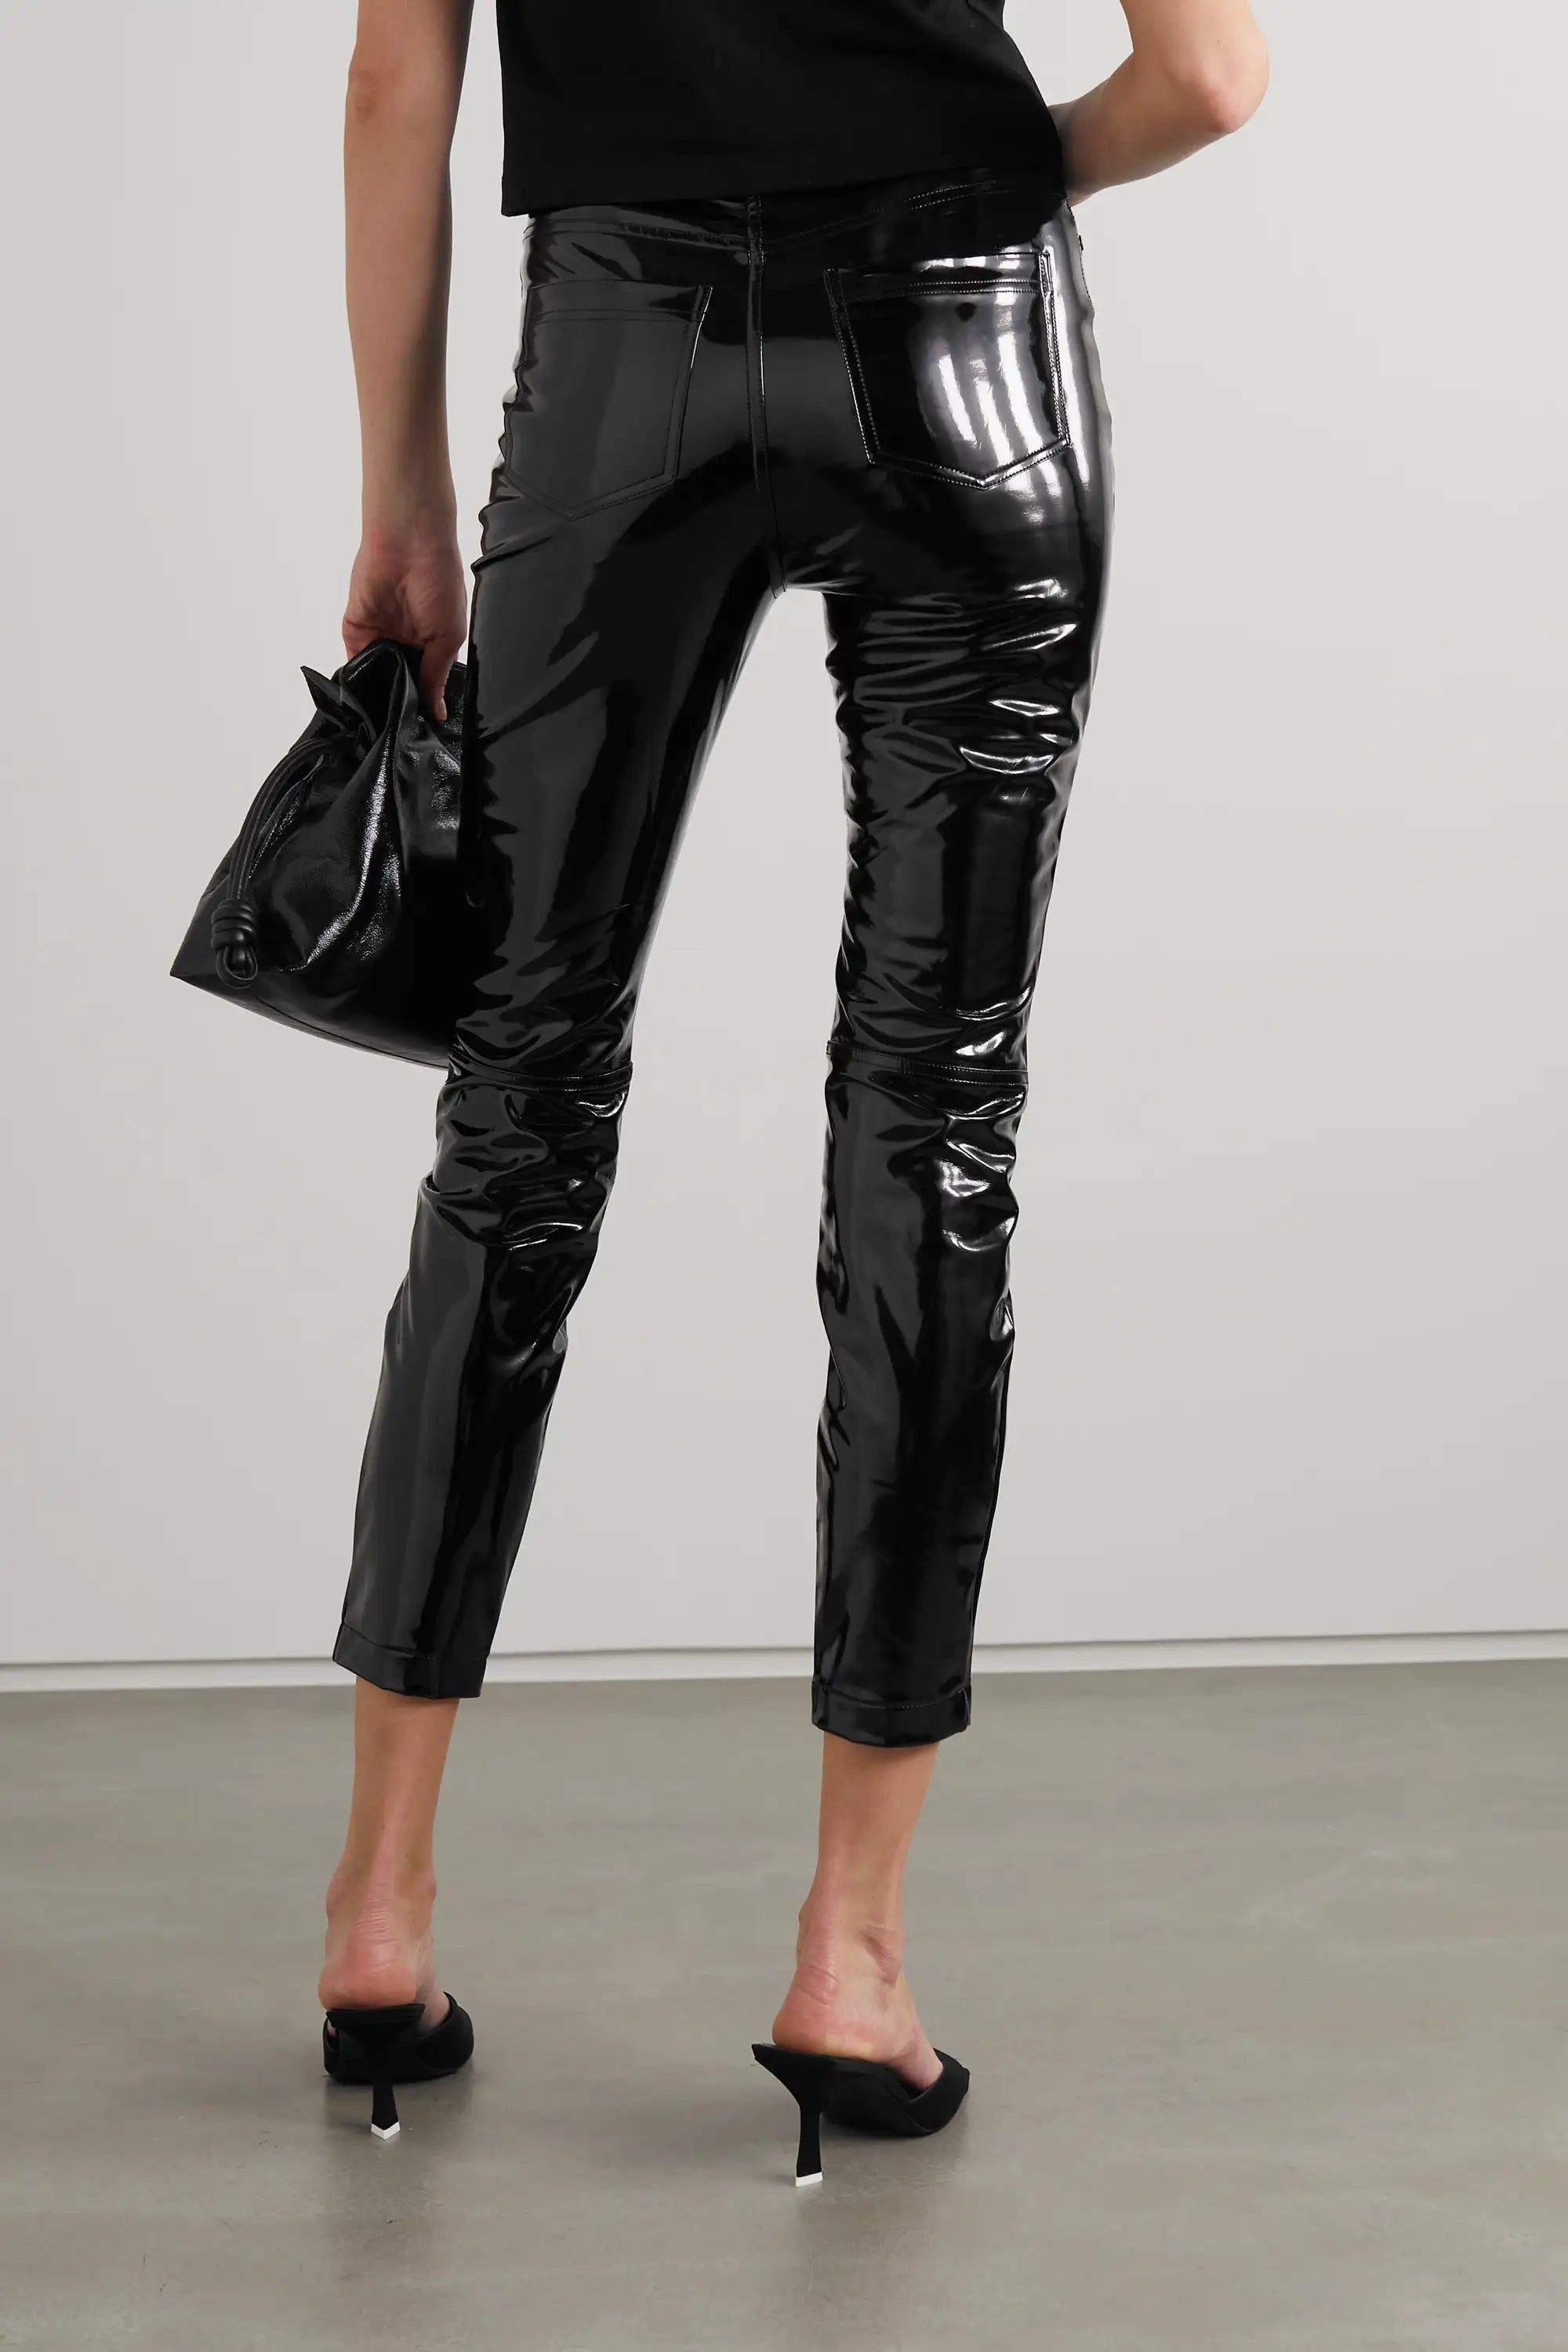 Leather Trousers 'Fashion Faux Pas Girls Regret most'